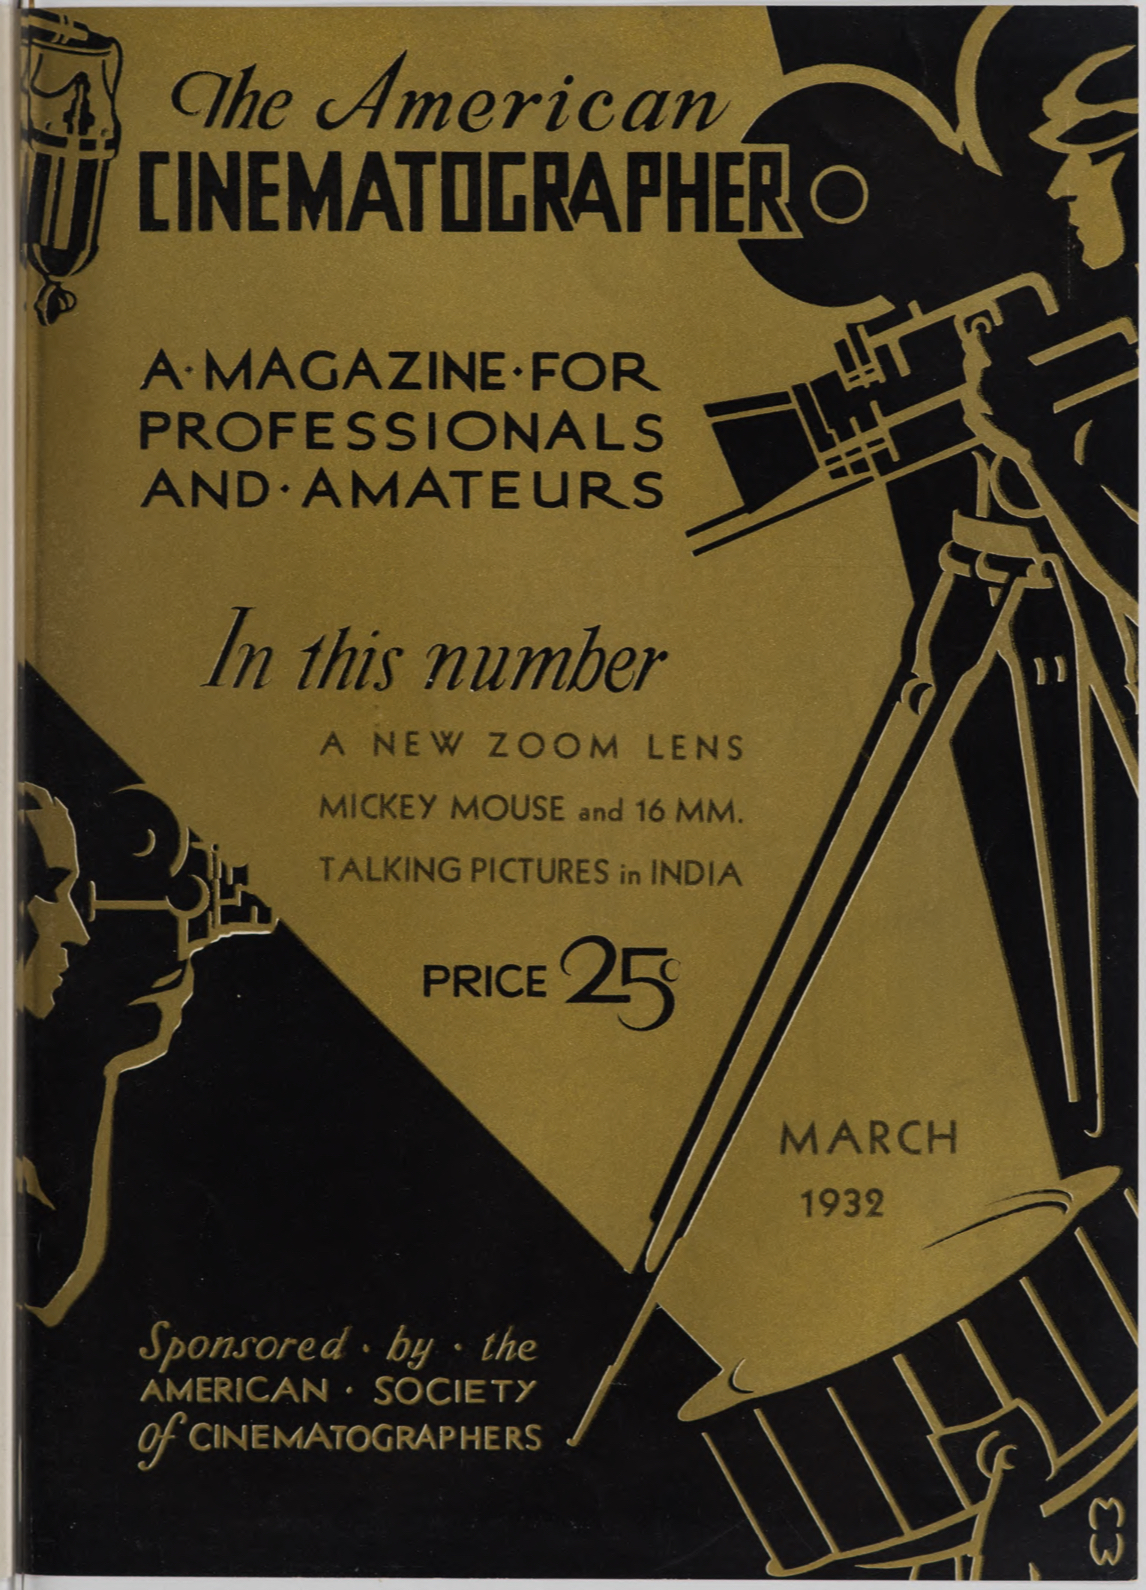 March 1932